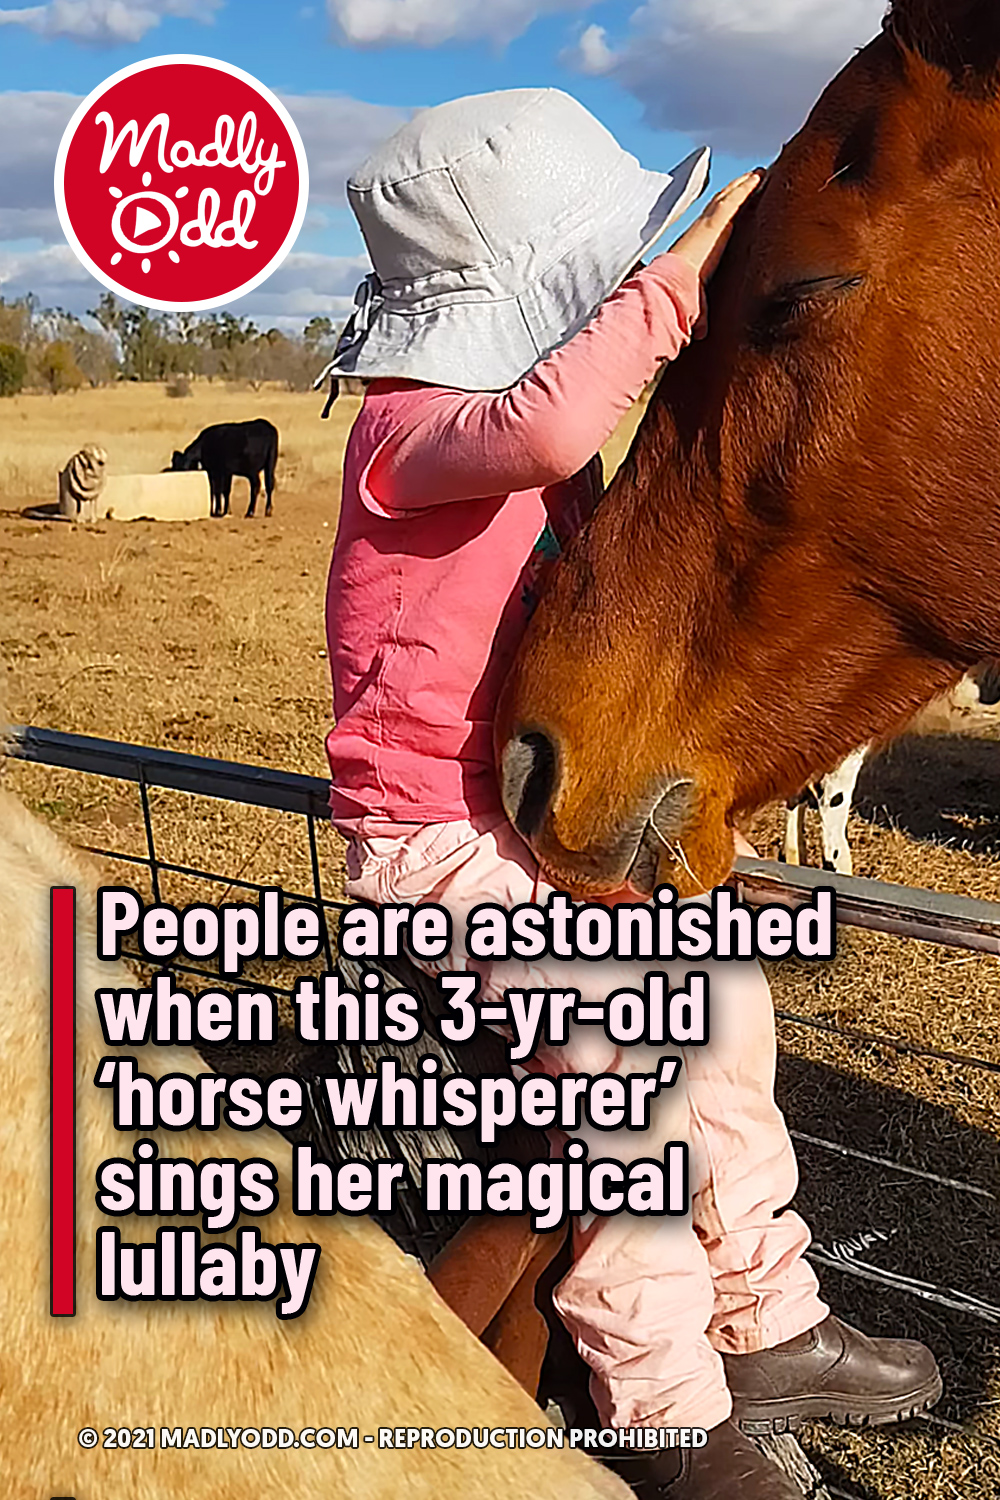 People are astonished when this 3-yr-old ‘horse whisperer’ sings her magical lullaby